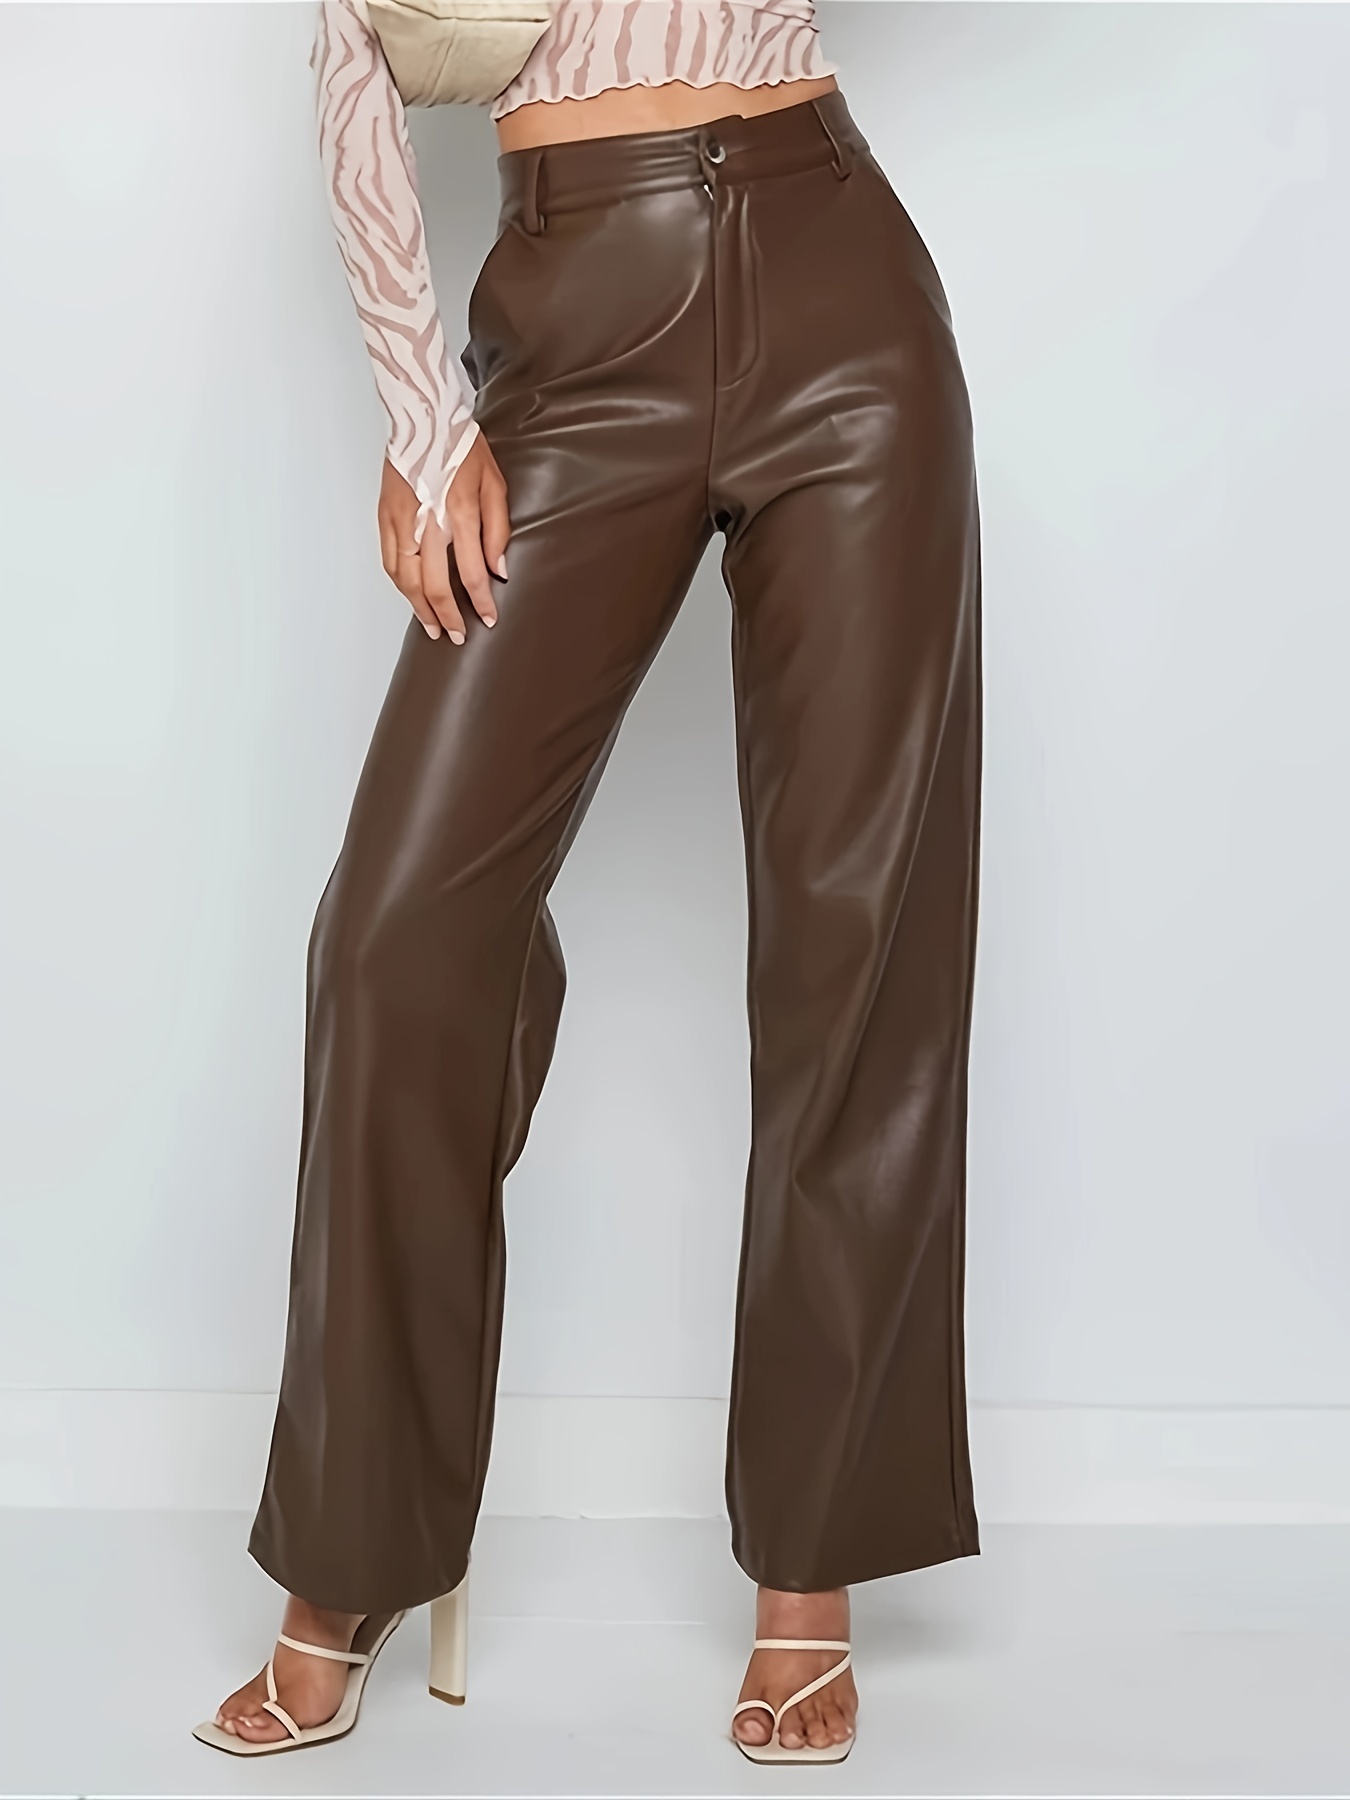 Black Flare Faux Leather Ruched Bum Pants